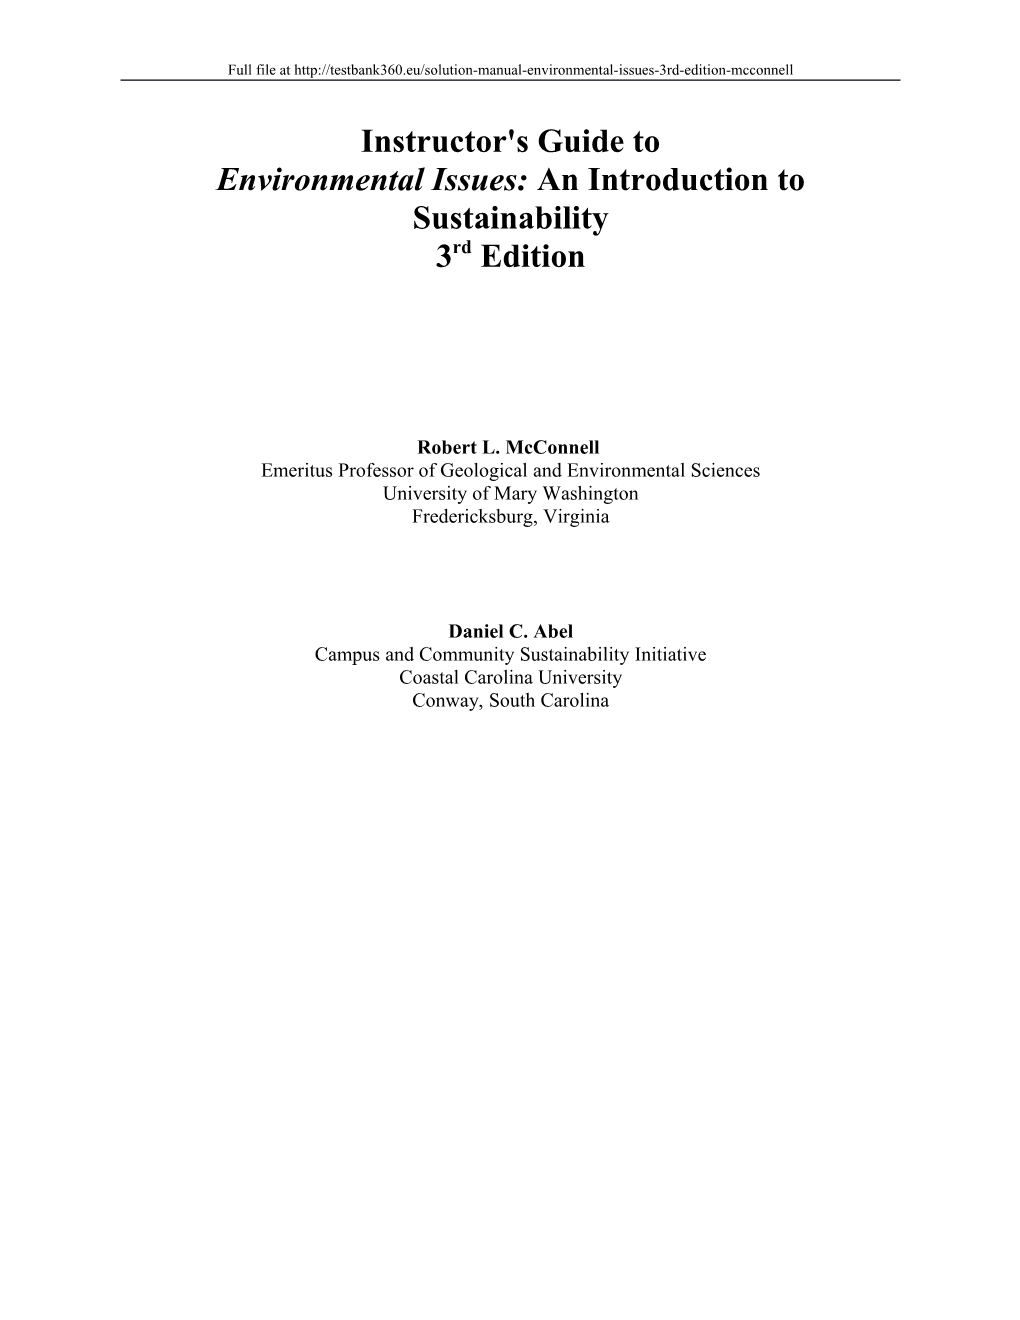 Environmental Issues: an Introduction to Sustainability